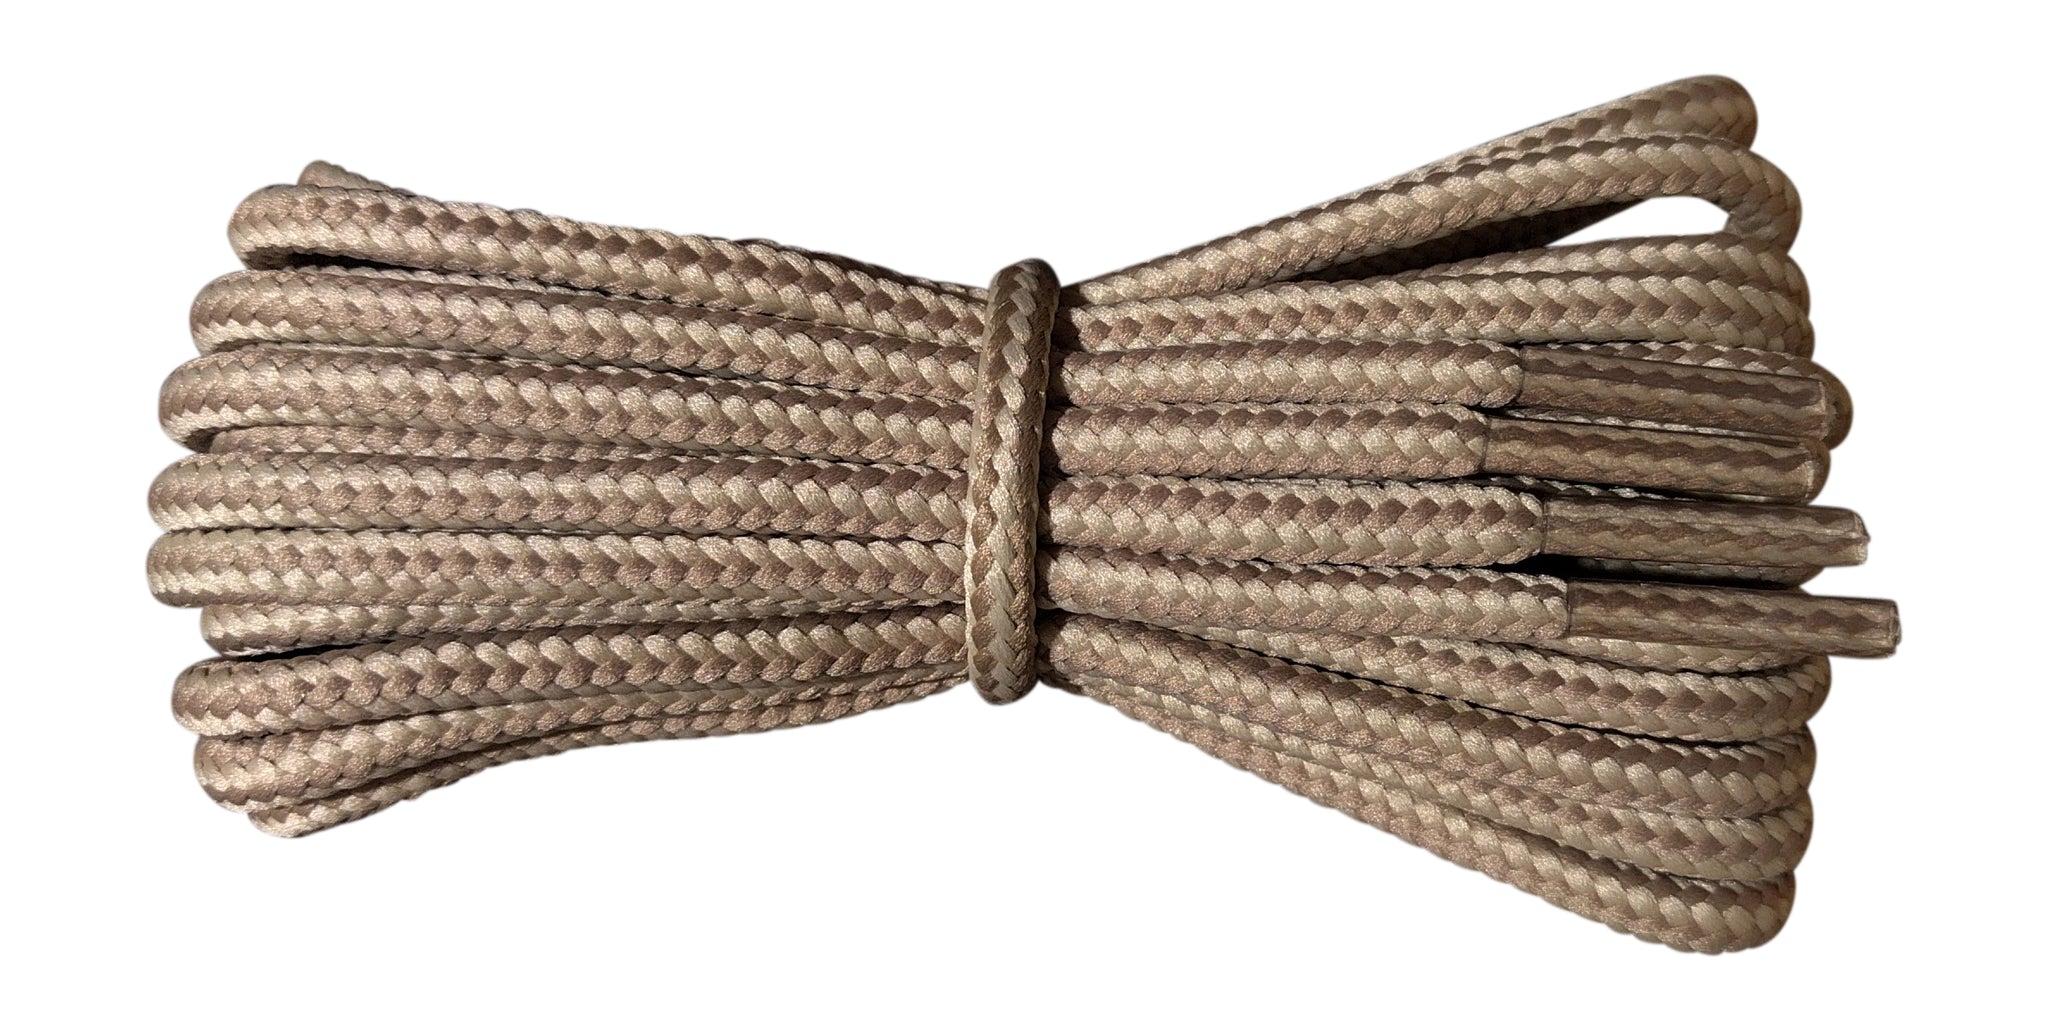 Round 4 mm Fawn and Cream stripes boot laces for walking and hiking boots - fabmania shoe laces